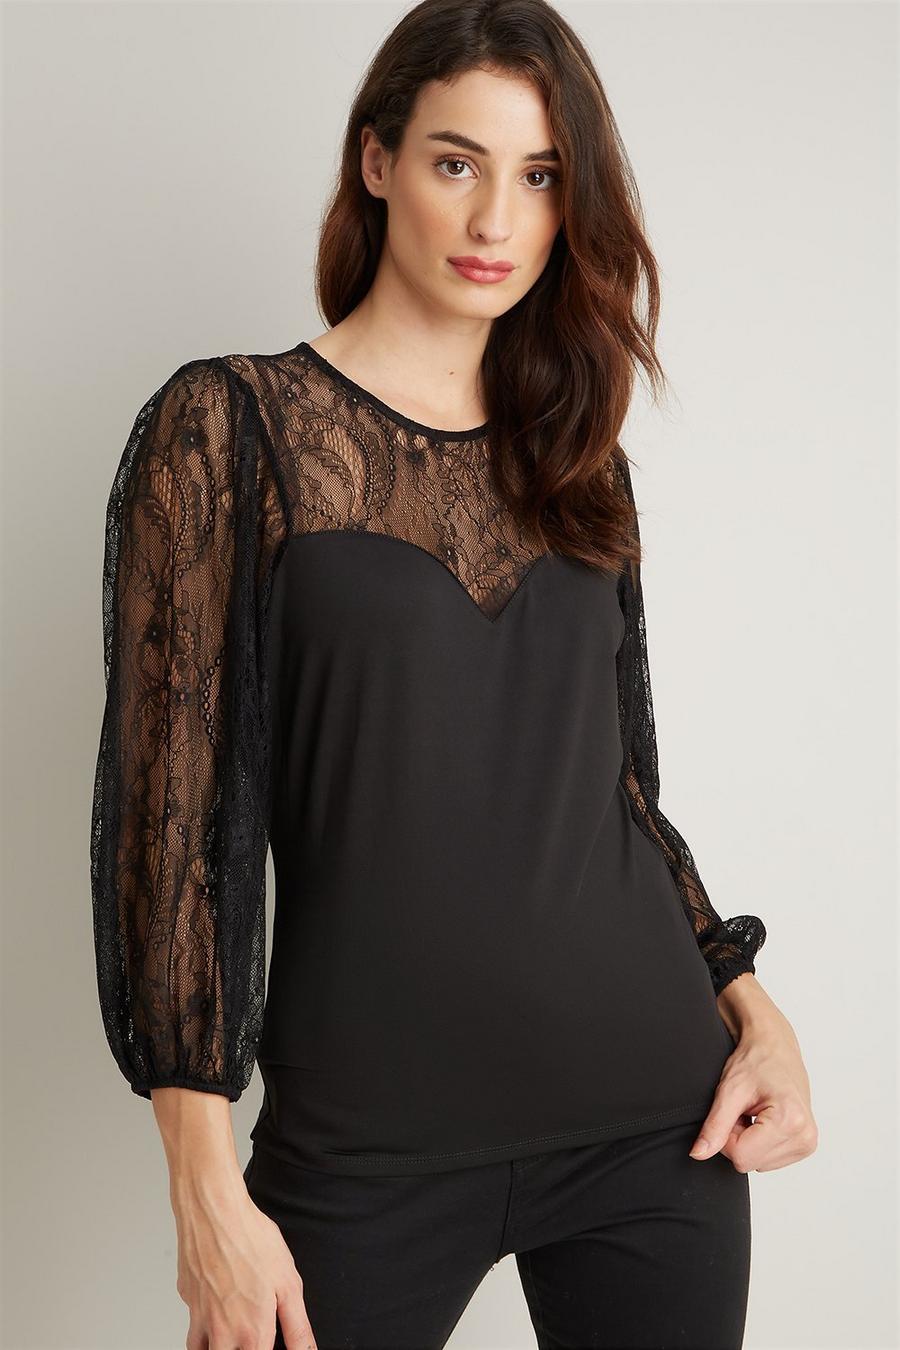 Black Lace Sweetheart Top